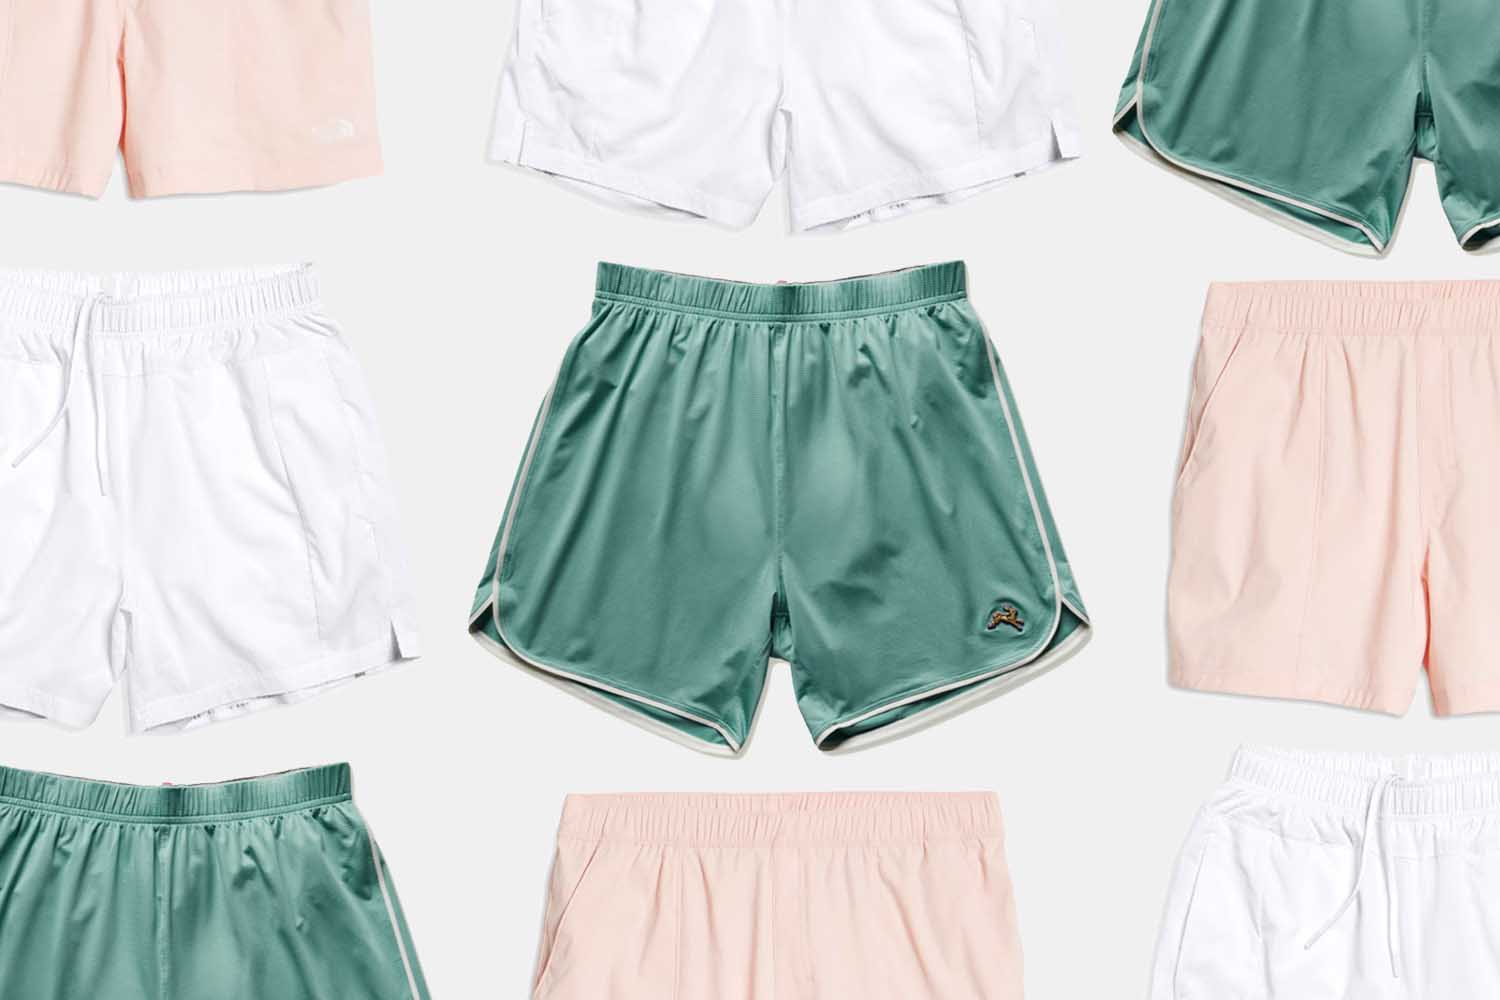 The 10 Best Short Gym Shorts. None of Them Over 5 Inches in Length.